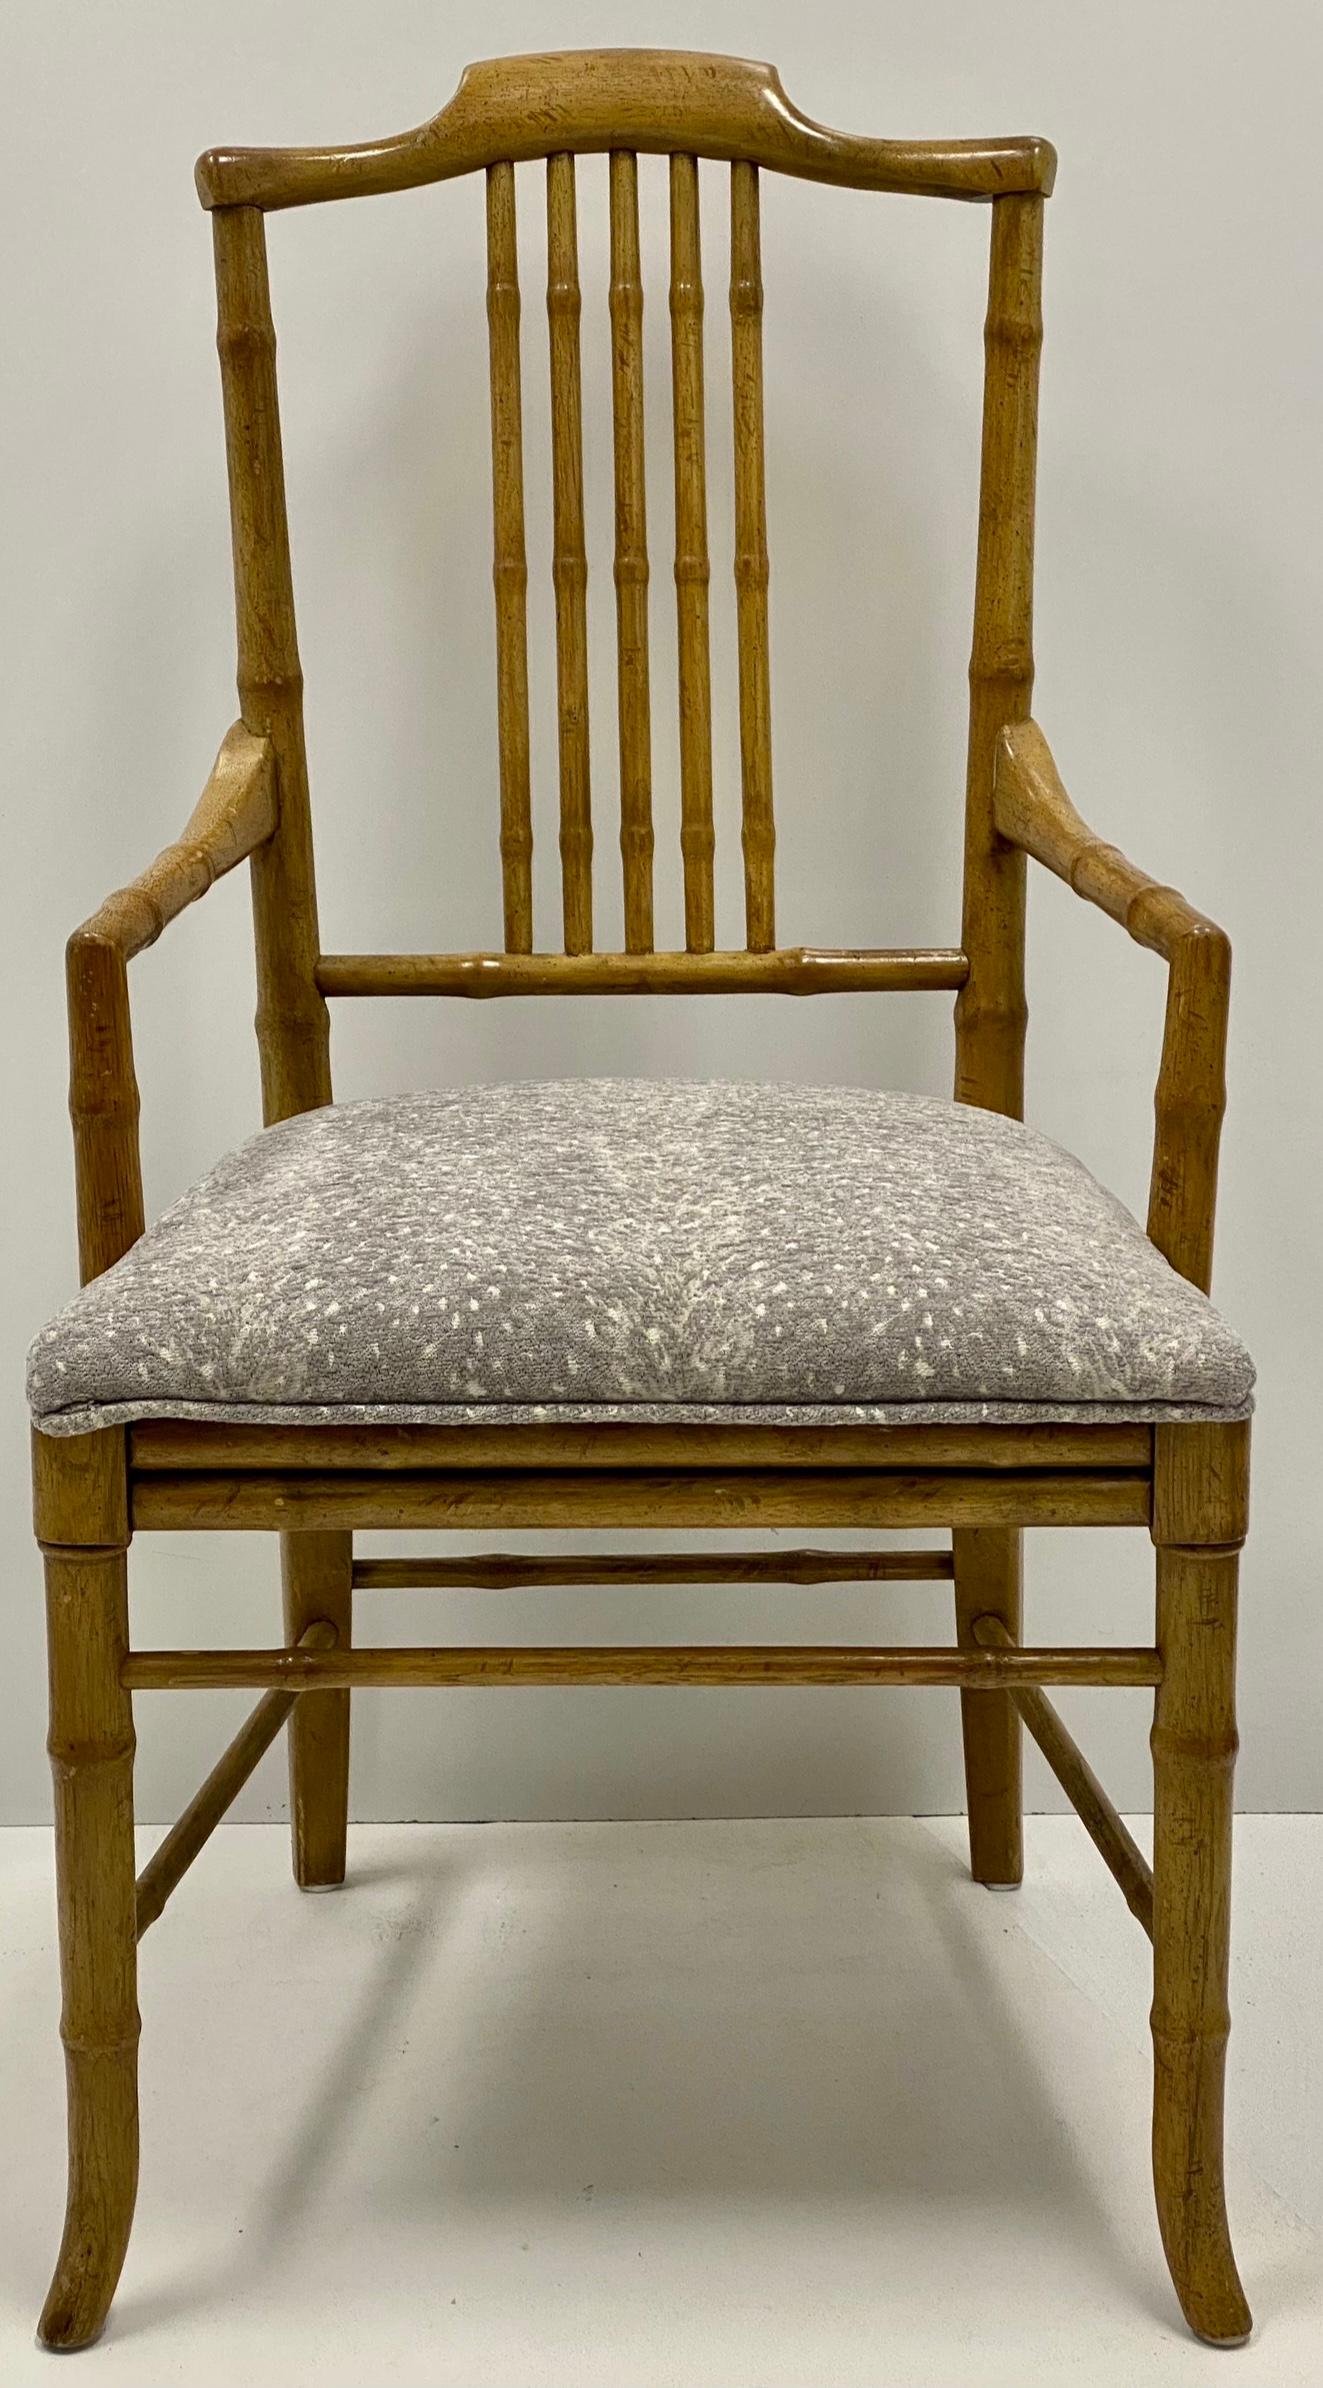 1970s Regency Style Faux Bamboo Bergere Armchairs In Grey Fawn Upholstery -Pair For Sale 2